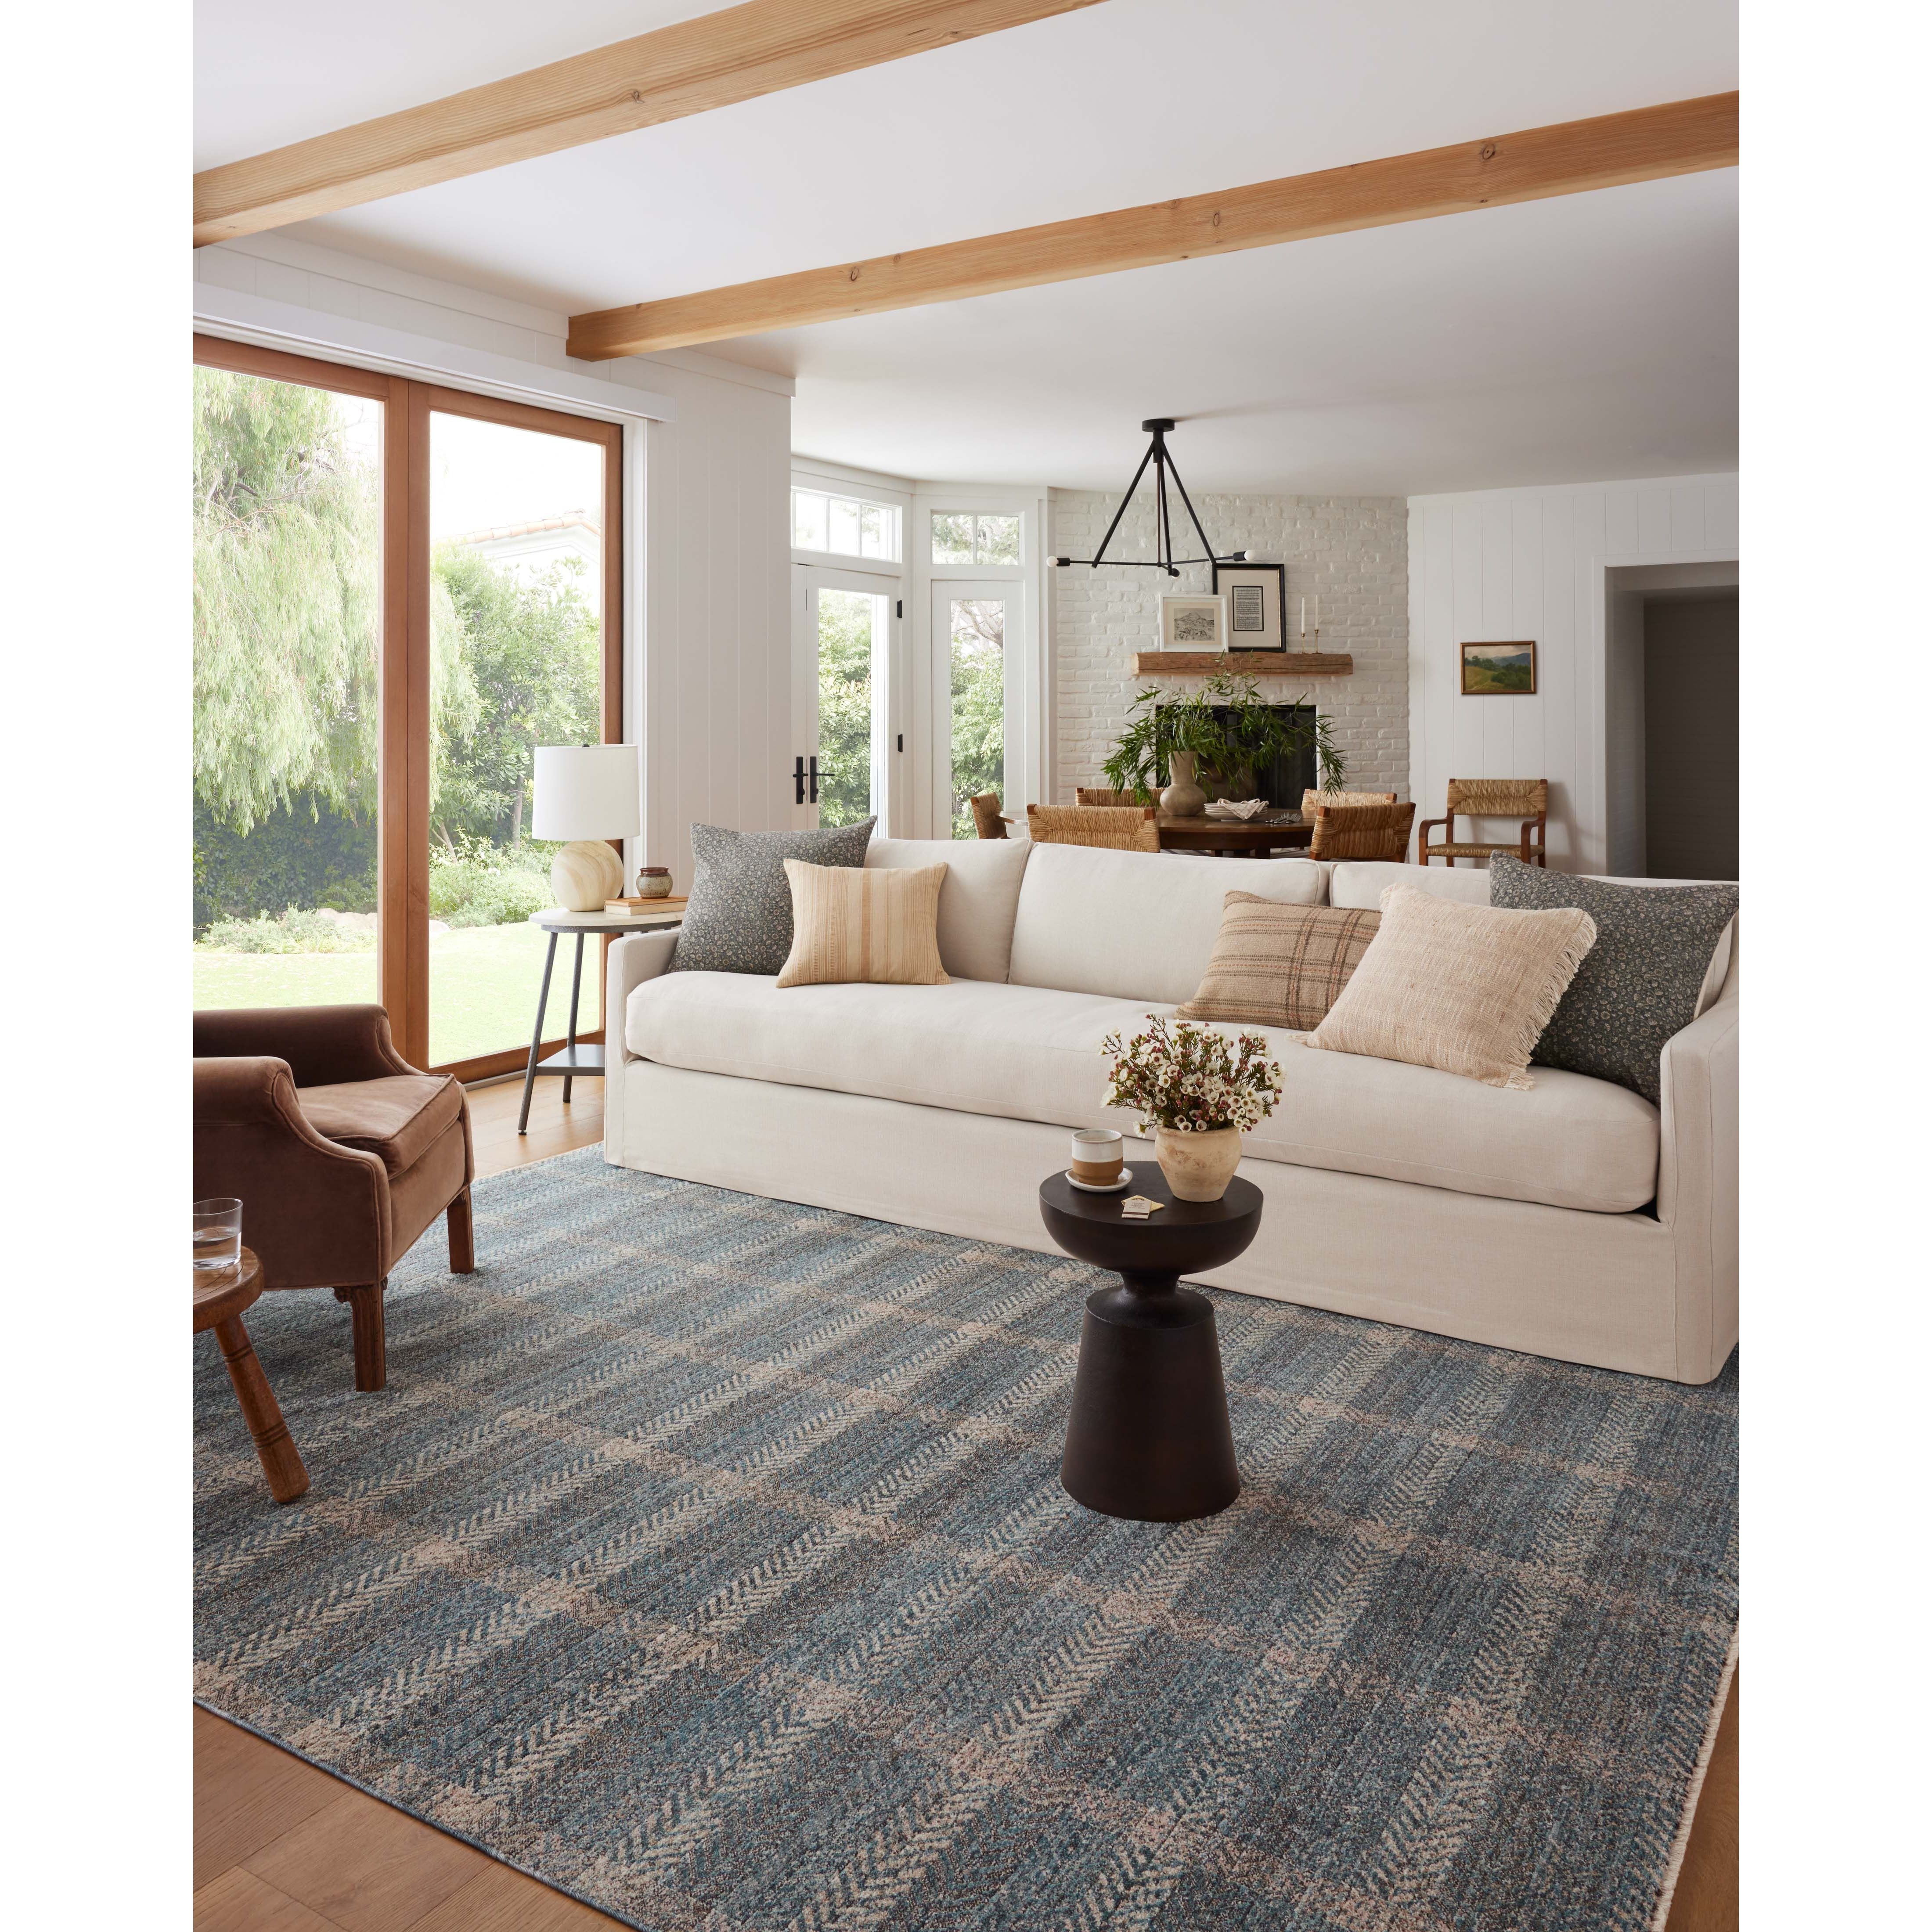 The Ember Collection by Angela Rose x Loloi is a modern flatweave area rug with a timeless plaid pattern that adds depth and coziness to any living room, bedroom, dining room, or hallway. Ember is power-loomed of 100% space-dyed polyester, a durable construction that creates a nuanced depth of color, available in a range of neutral palettes. Amethyst Home provides interior design, new home construction design consulting, vintage area rugs, and lighting in the Washington metro area.